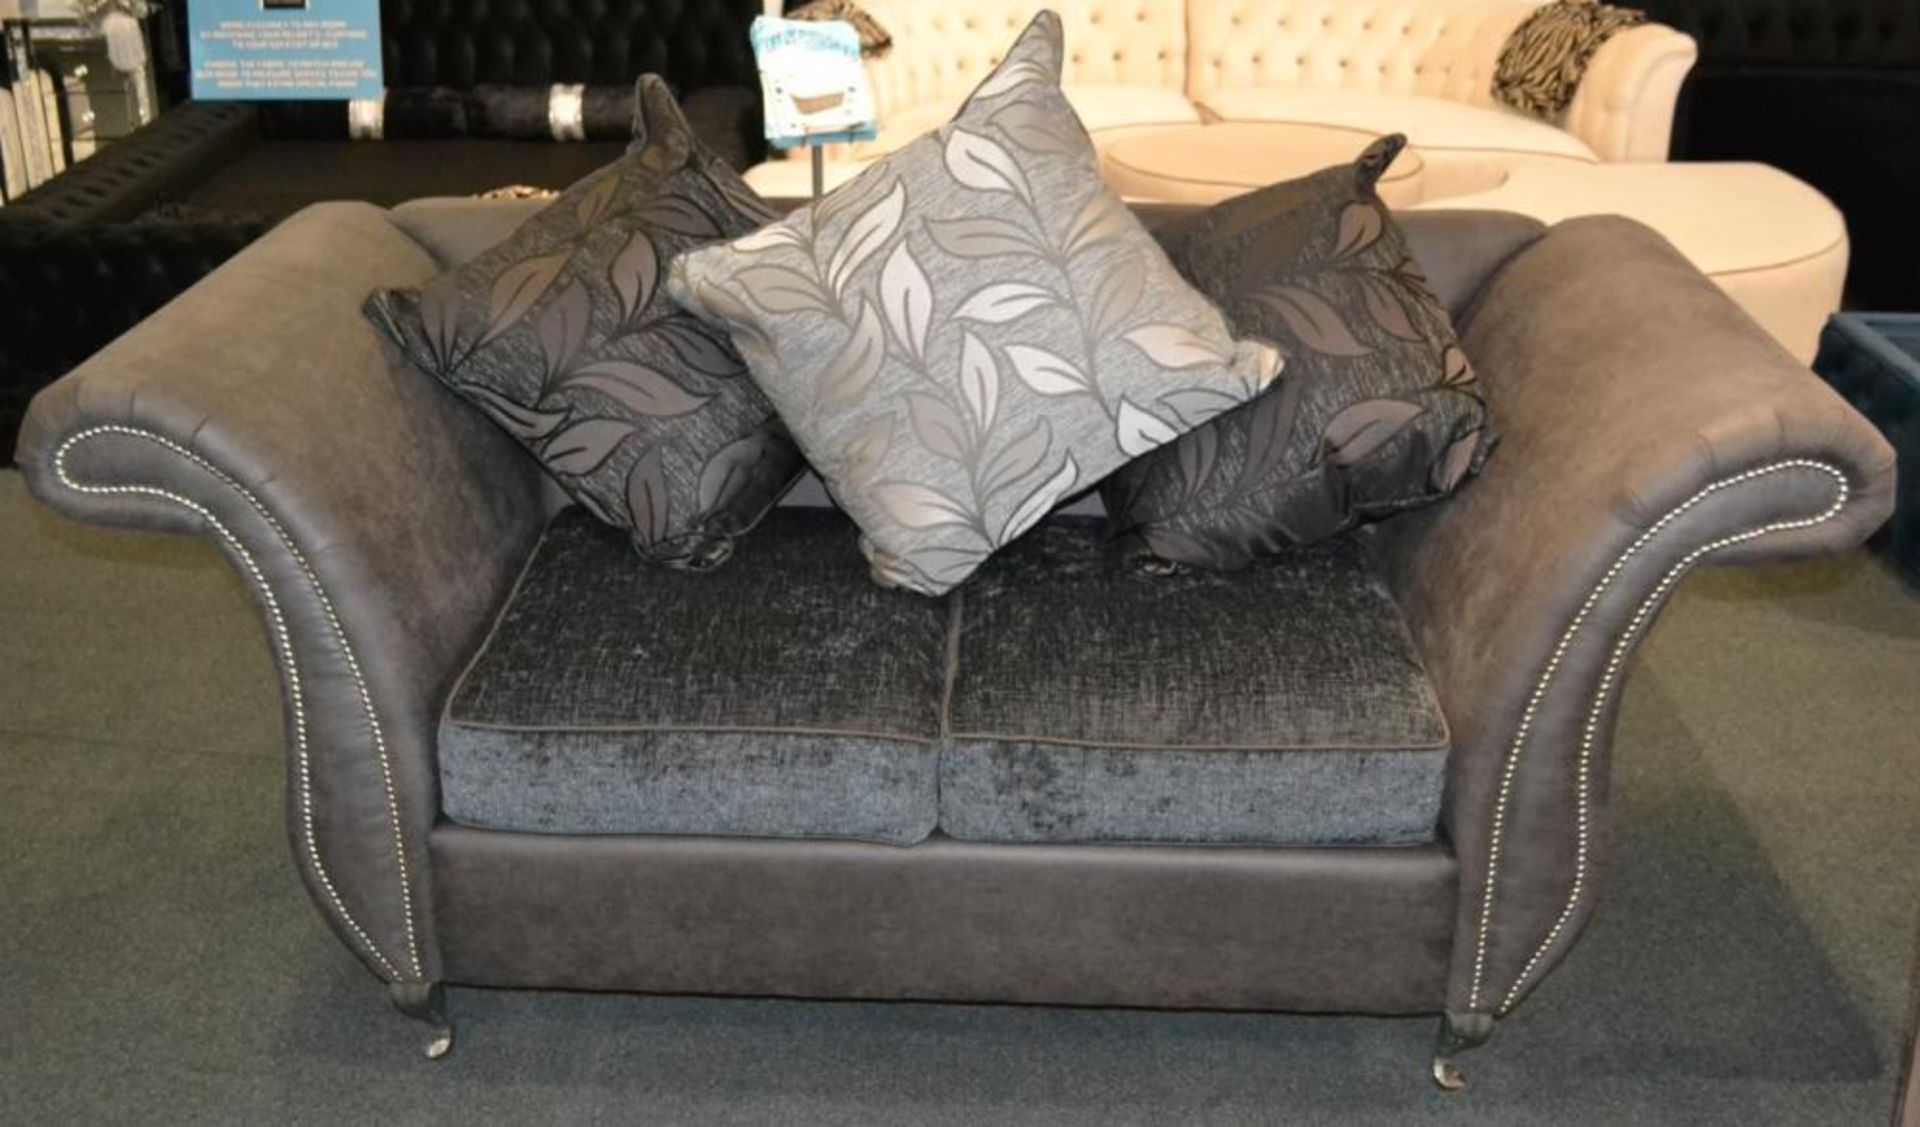 1 x Stylish Bespoke Double Seater Sofa. This sofa is covered in a soft dark grey leatherette with th - Image 2 of 5